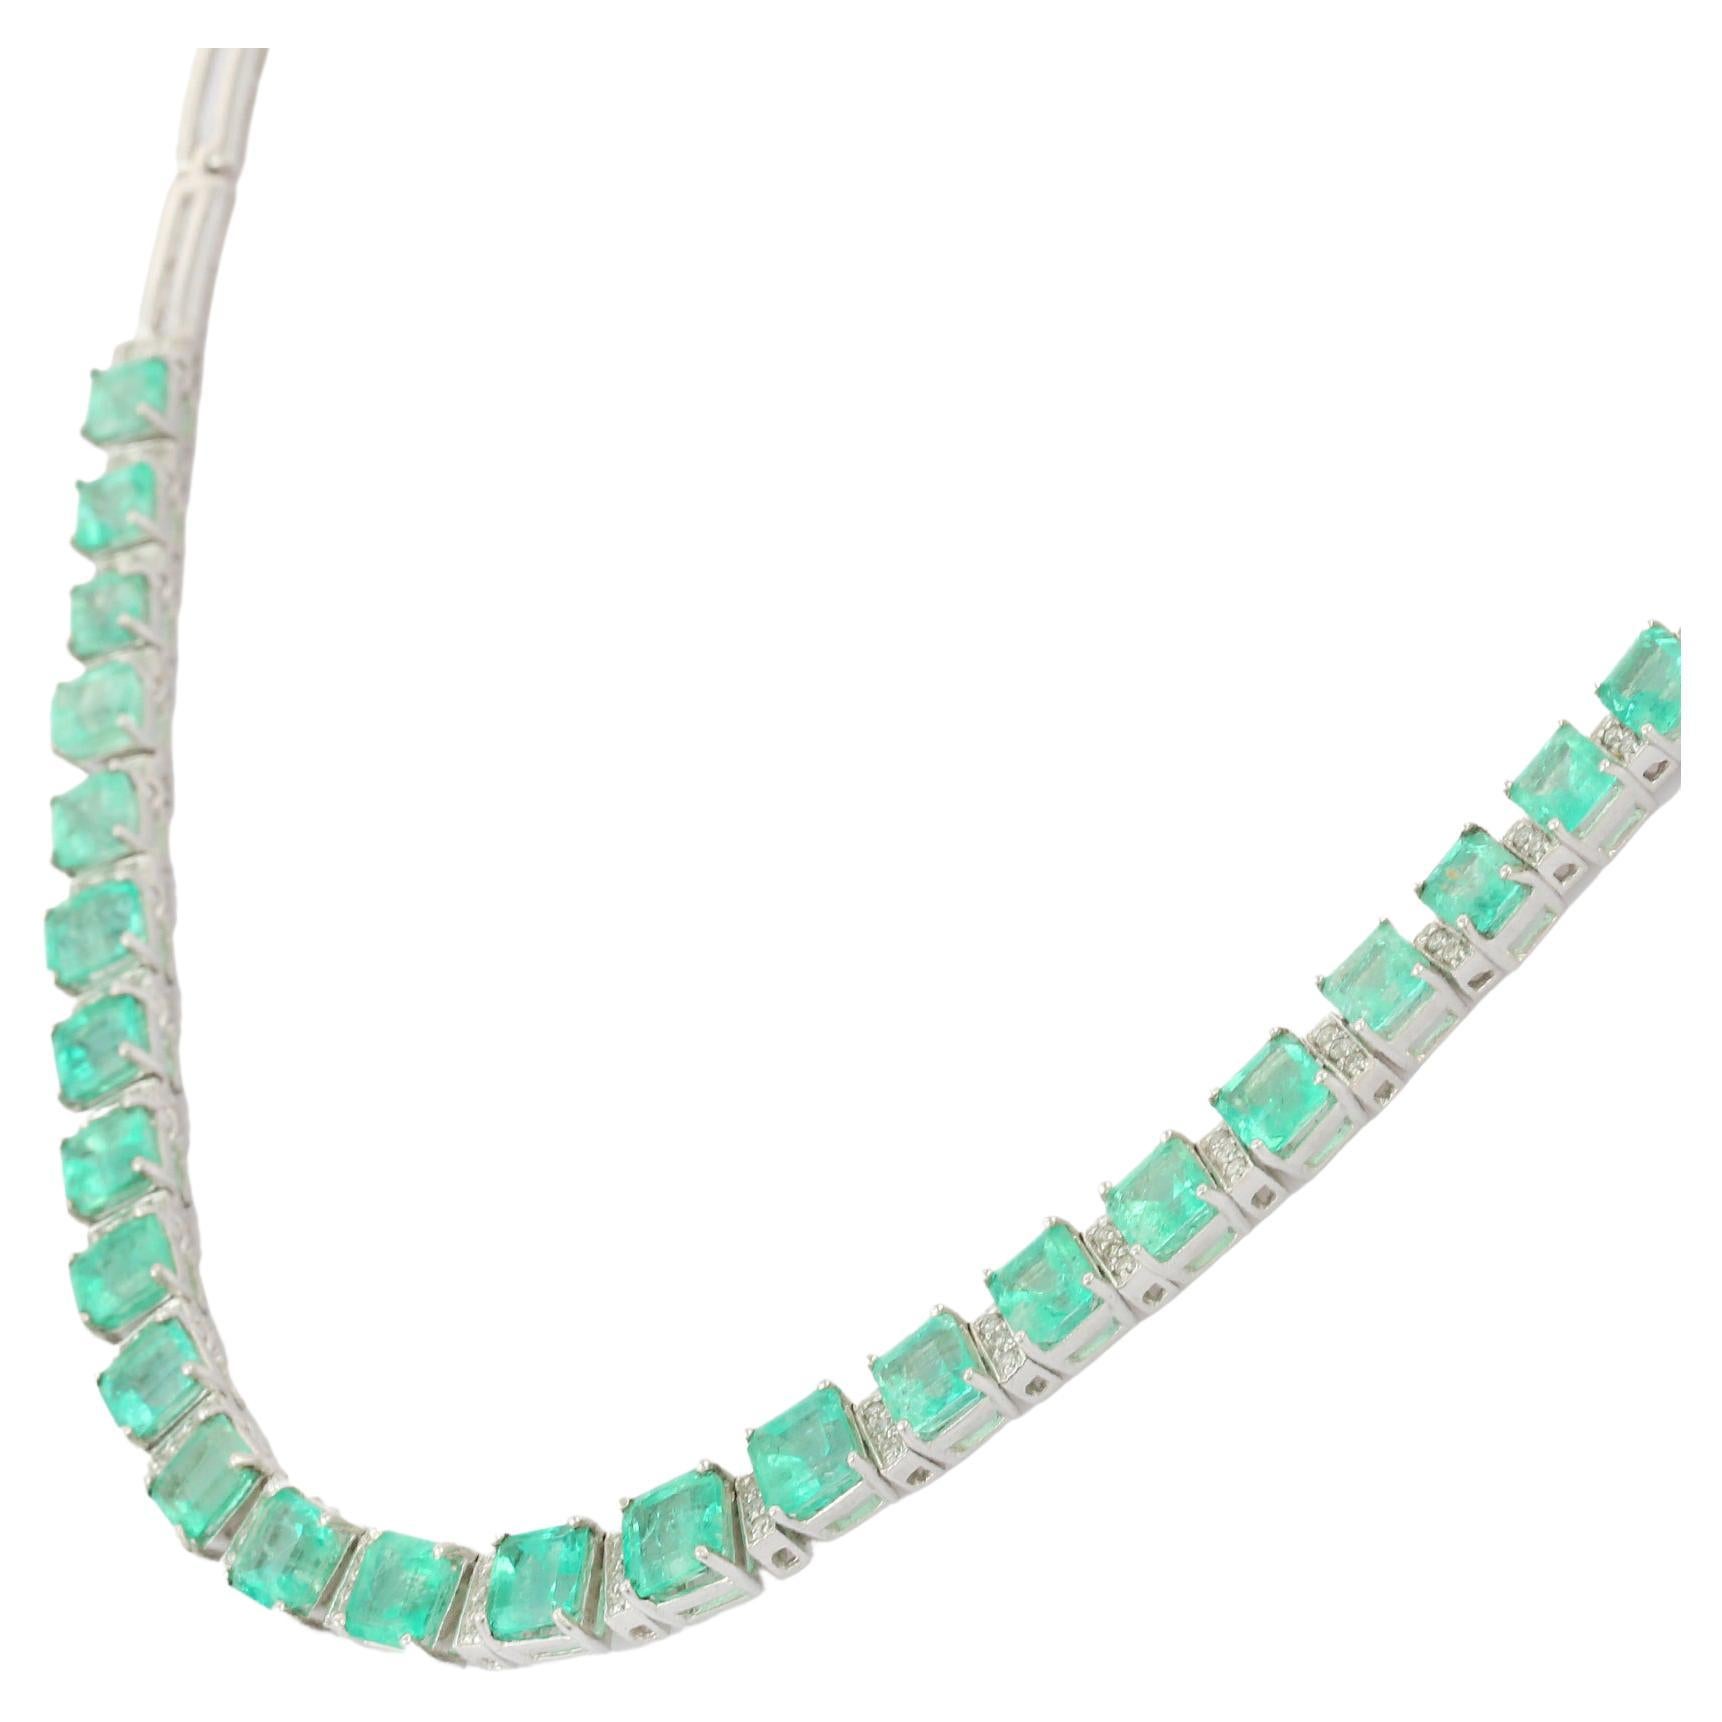 Square Shape Emerald with Diamonds Necklace in 18 Karat White Gold